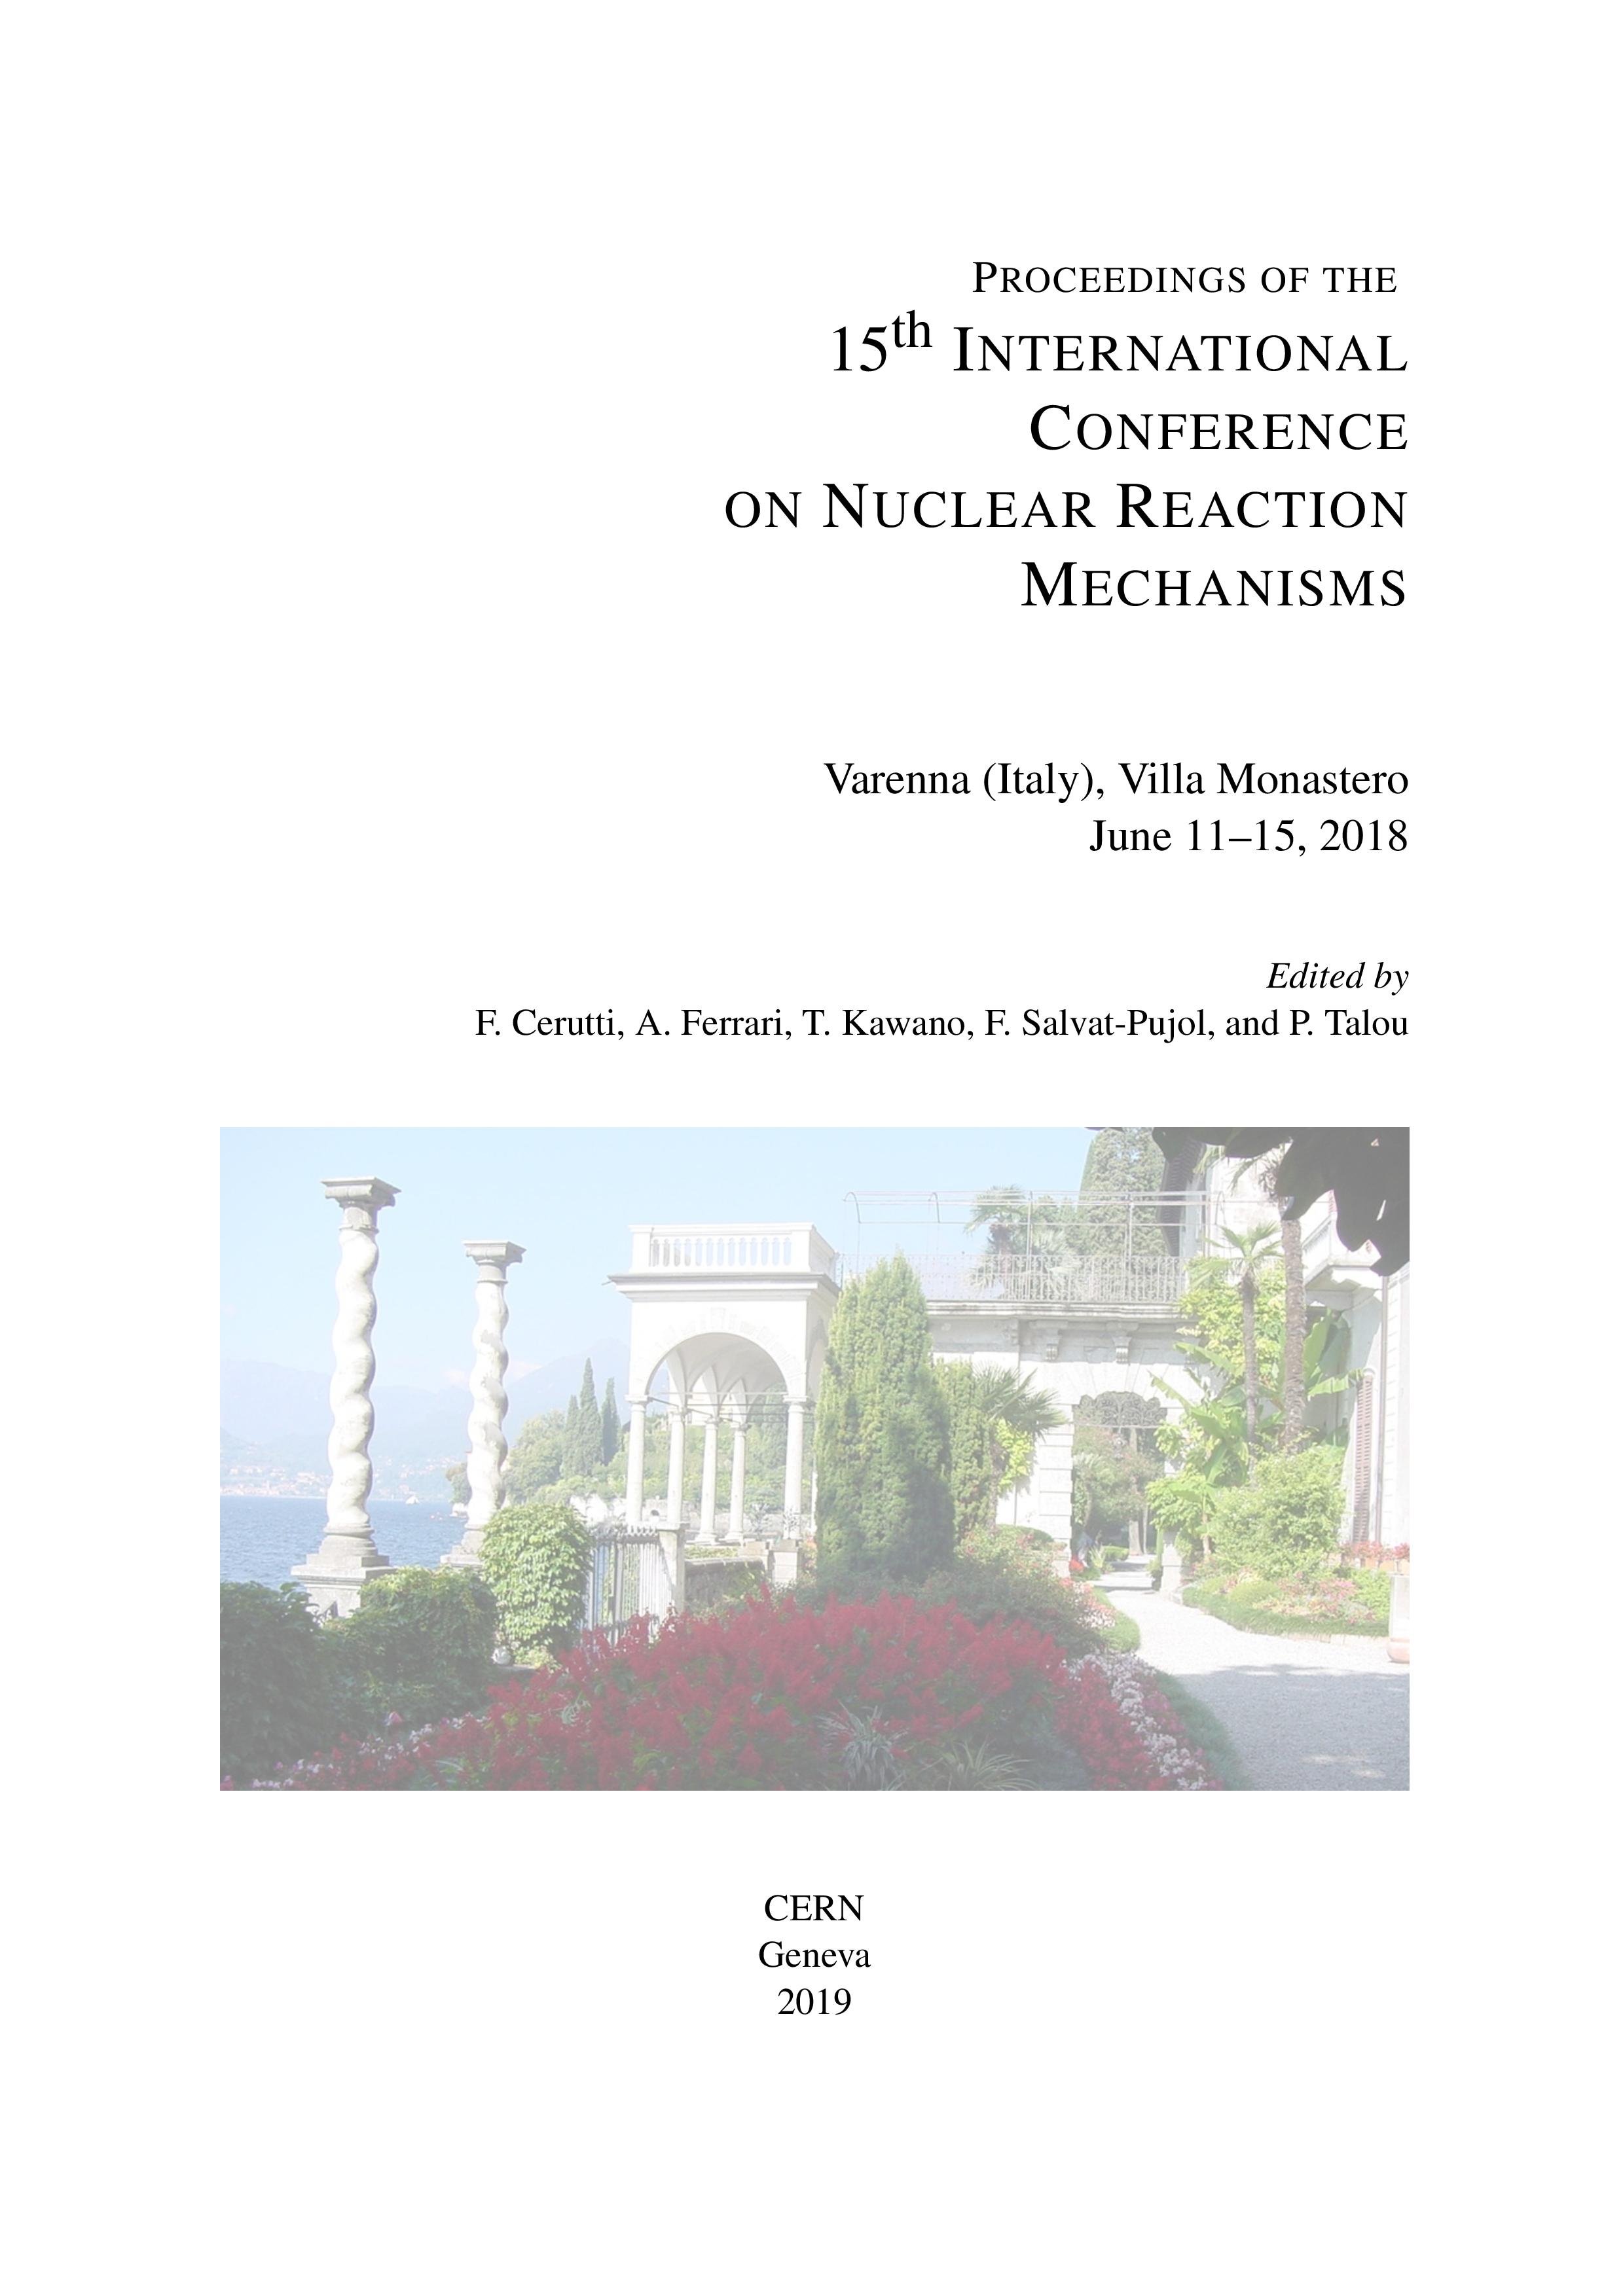 					View Vol. 1 (2019): Proceedings of the 15th International Conference on Nuclear Reaction Mechanisms
				